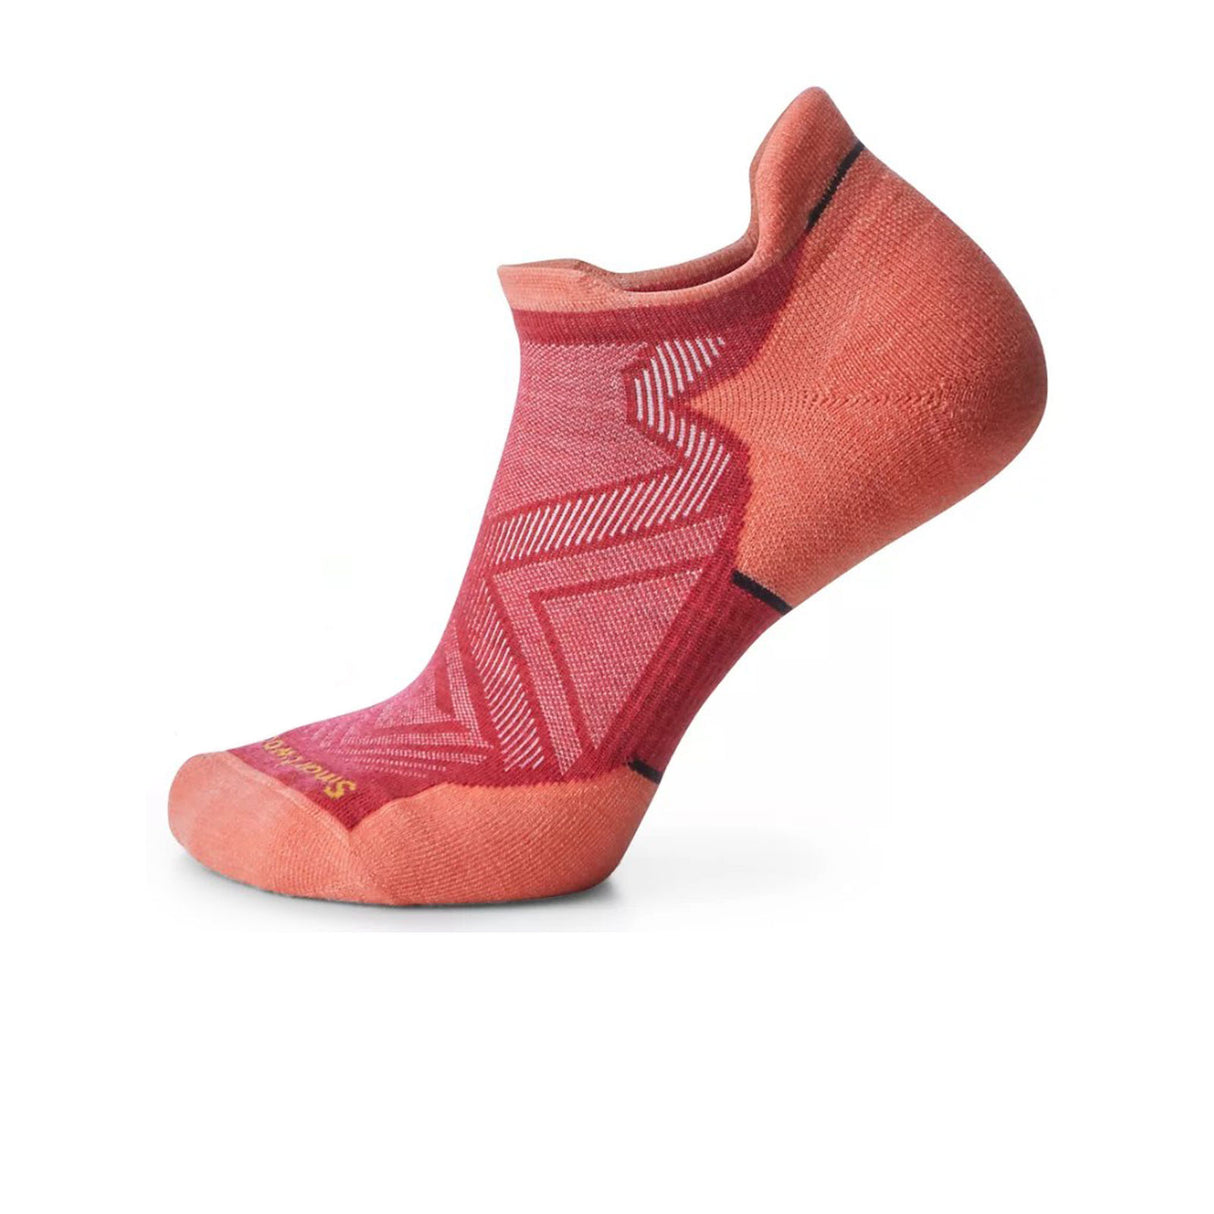 Smartwool Run Targeted Cushion Low Ankle Sock (Women) - Pomegranate Socks - Perf - Low Cut - The Heel Shoe Fitters